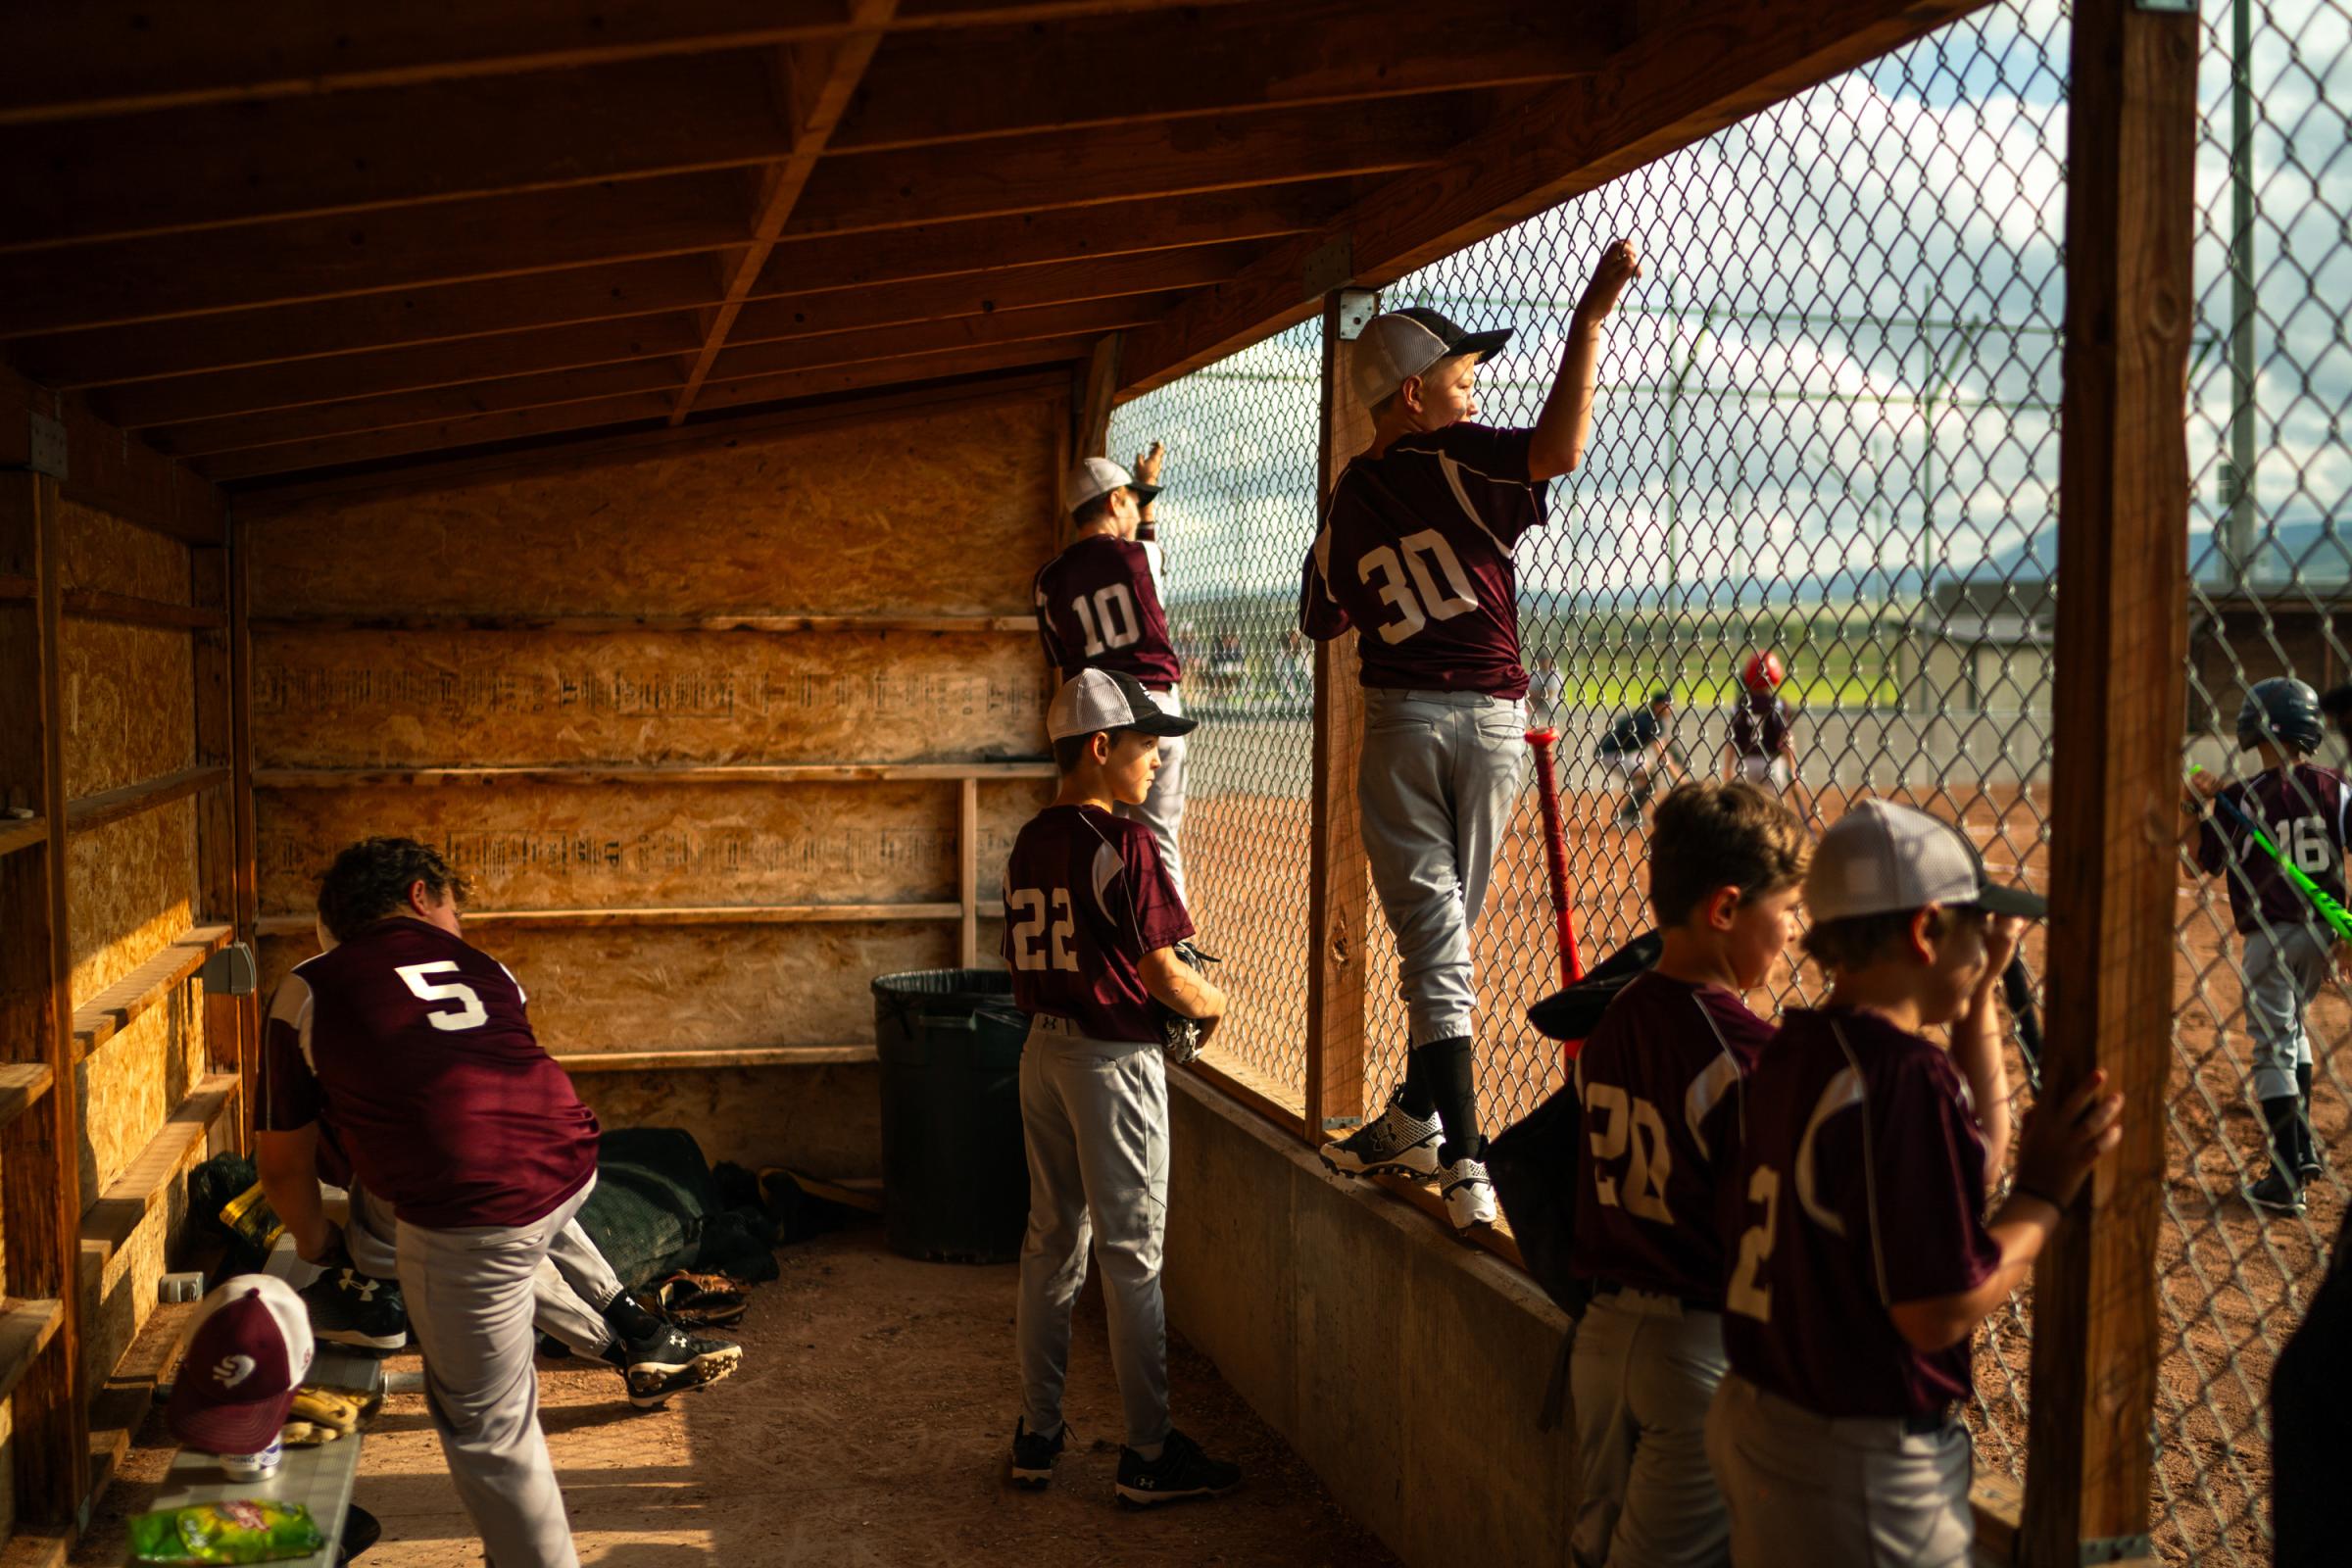 Singles - Little League players watch as a team mate goes to bat on...